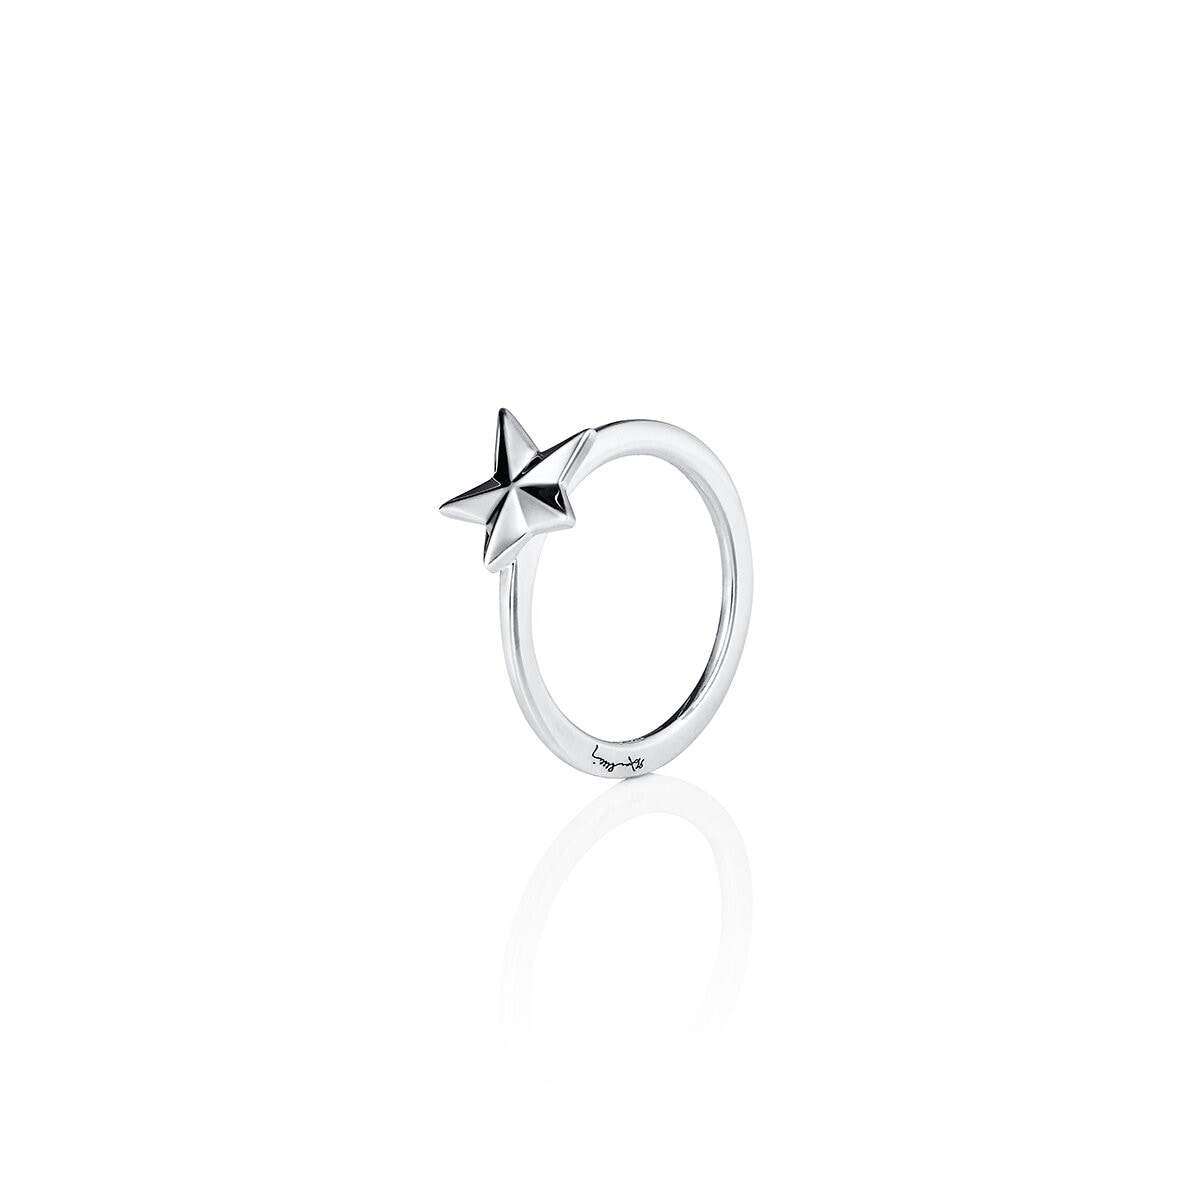 Catch a falling star ring